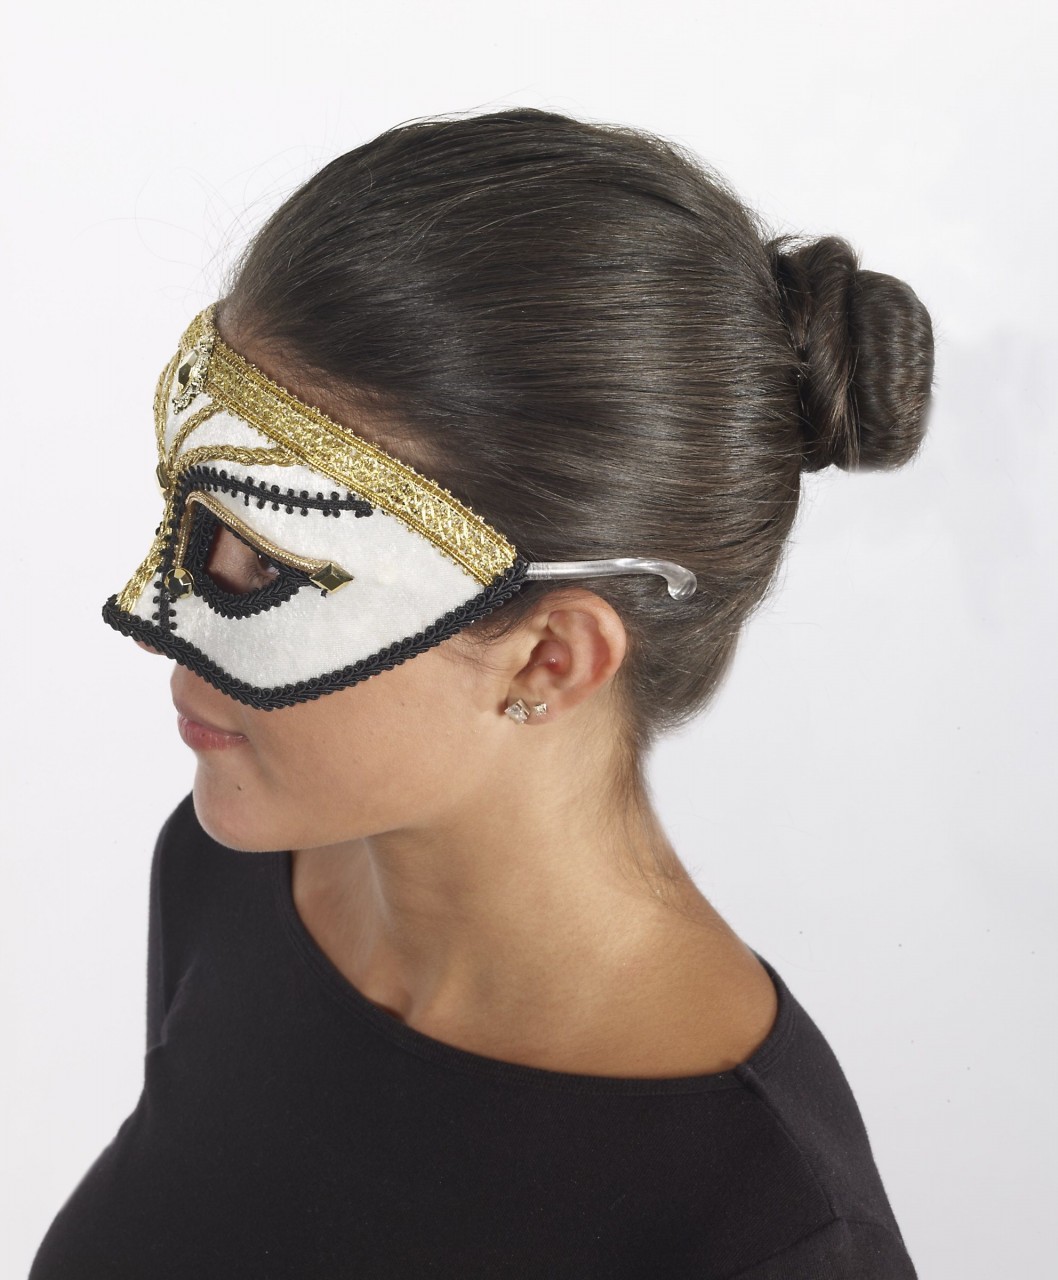 White Masquerade Mask with Gold & Black Trim Costumes